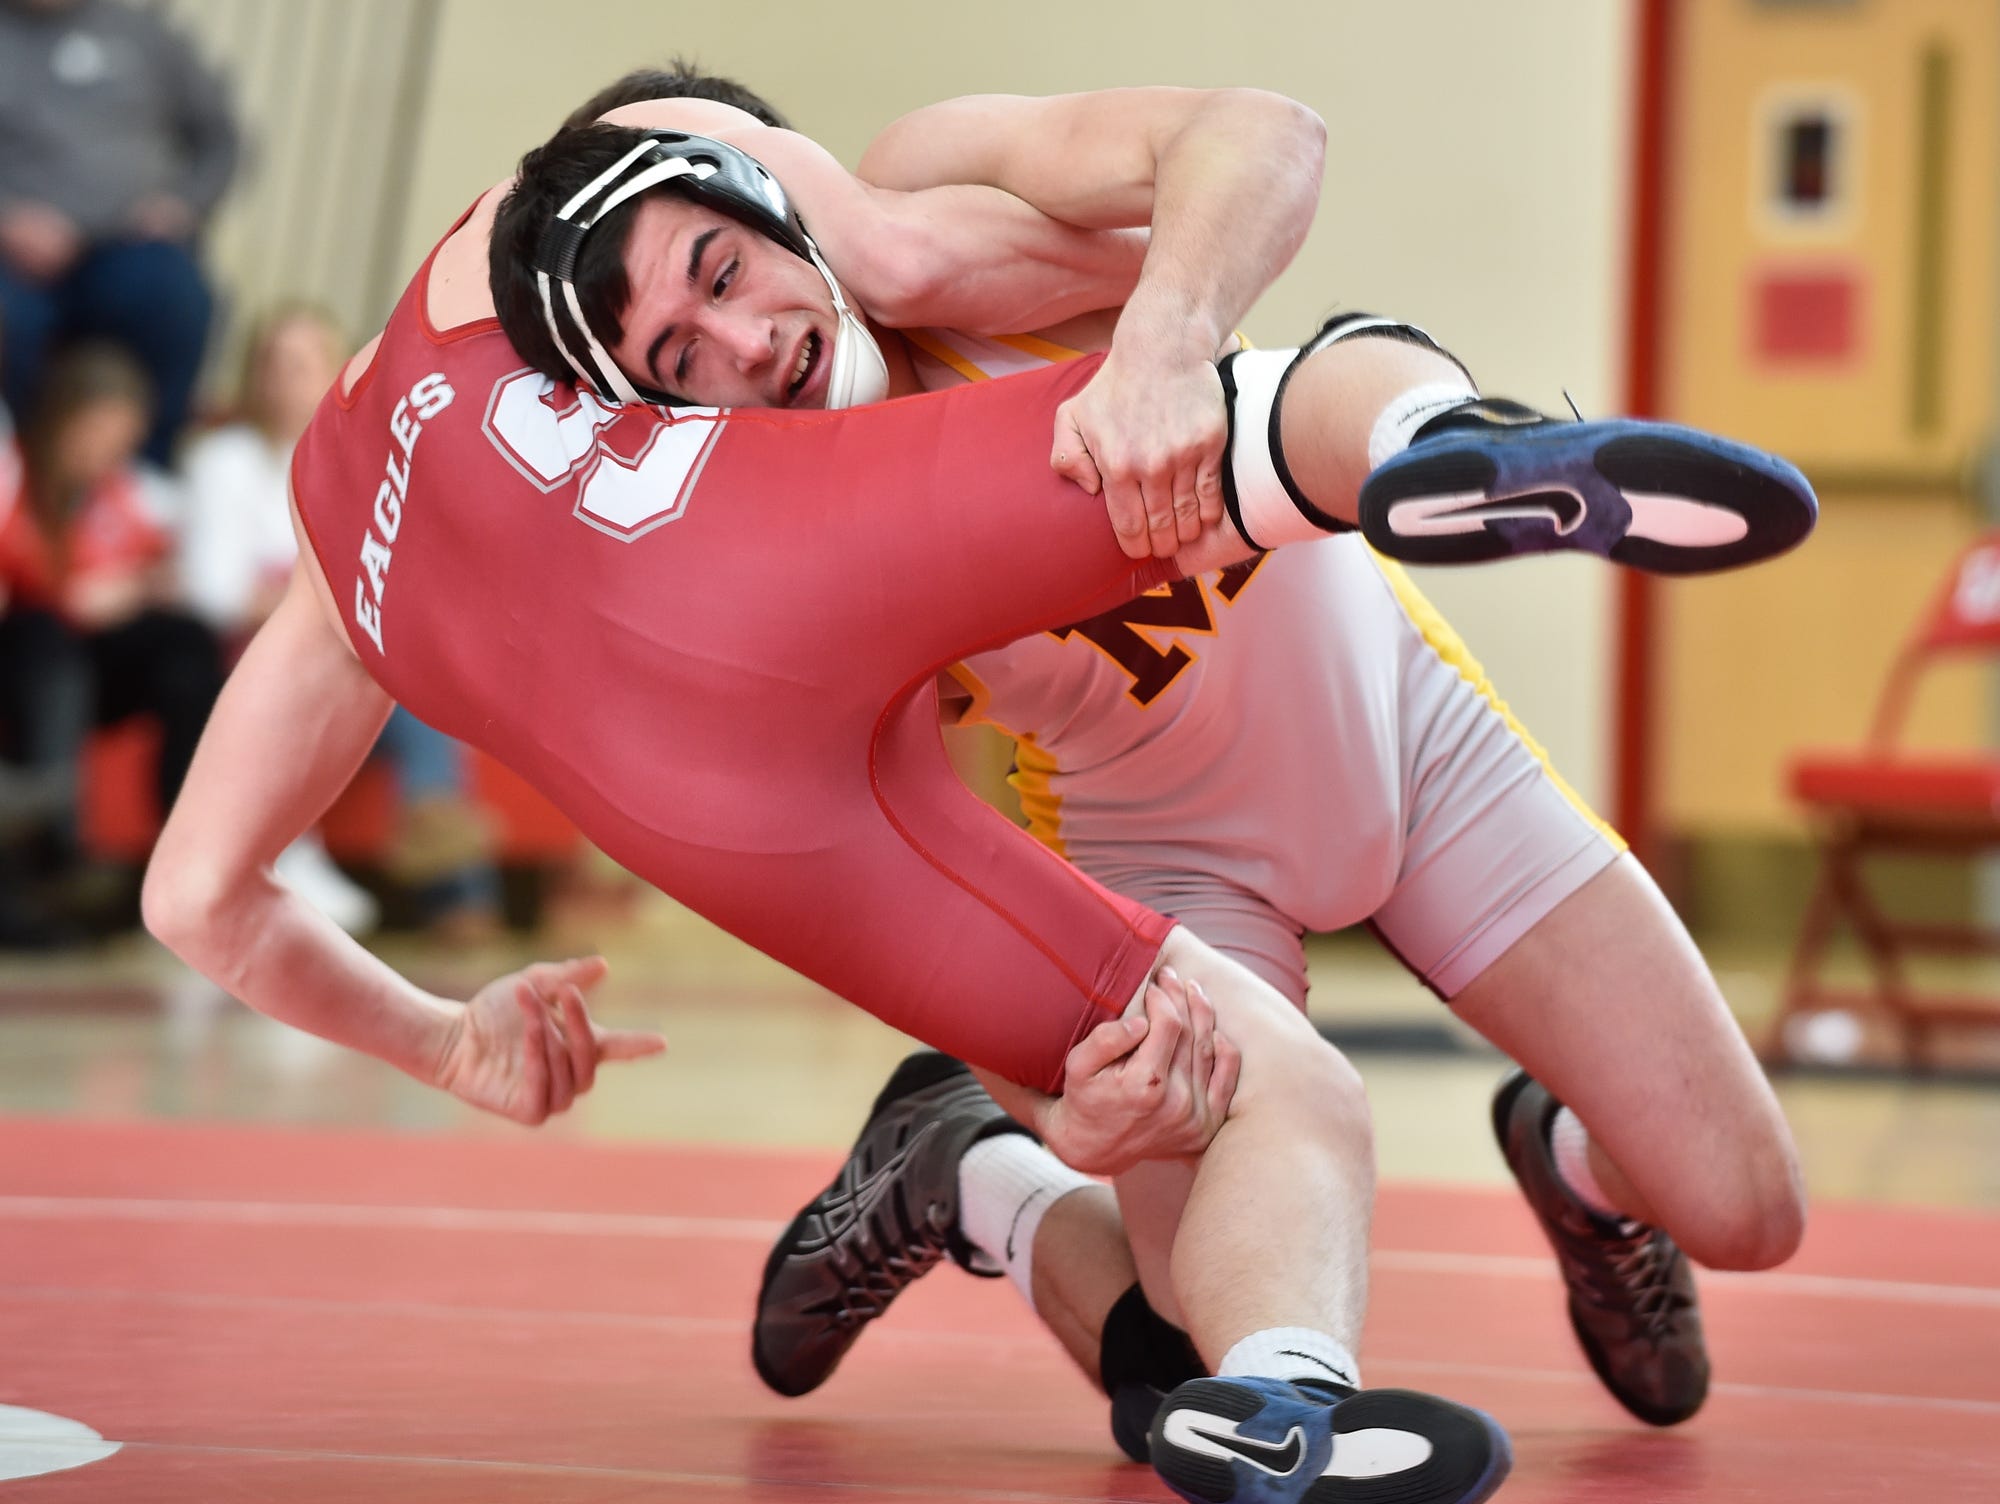 Milford's Barton Dalious, right muscles Smyrna's Tanner Mullen to the mat in the 145 pound match at Smyrna High School.